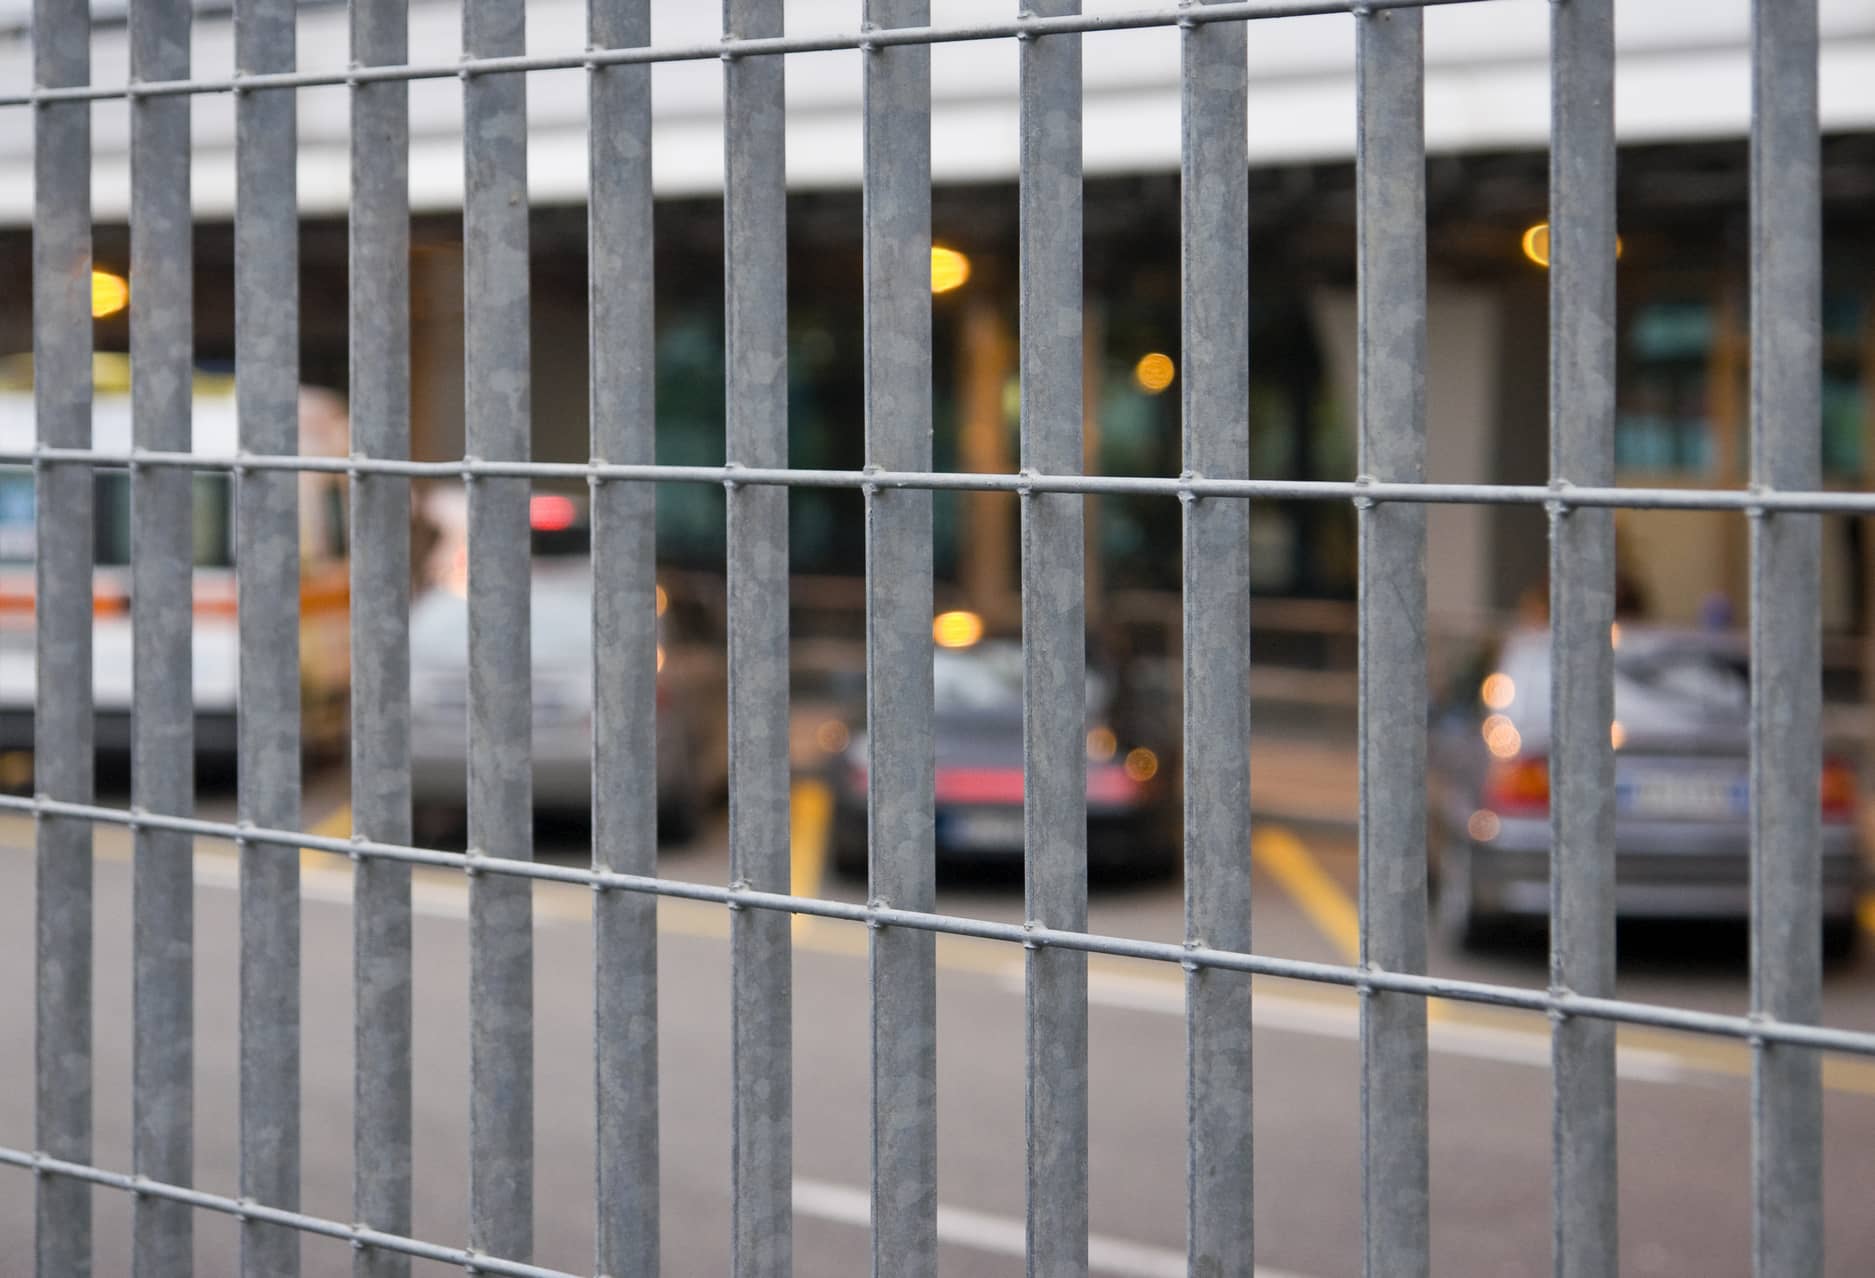 This picture shows a metal fence surrounding a commercial parking lot area.